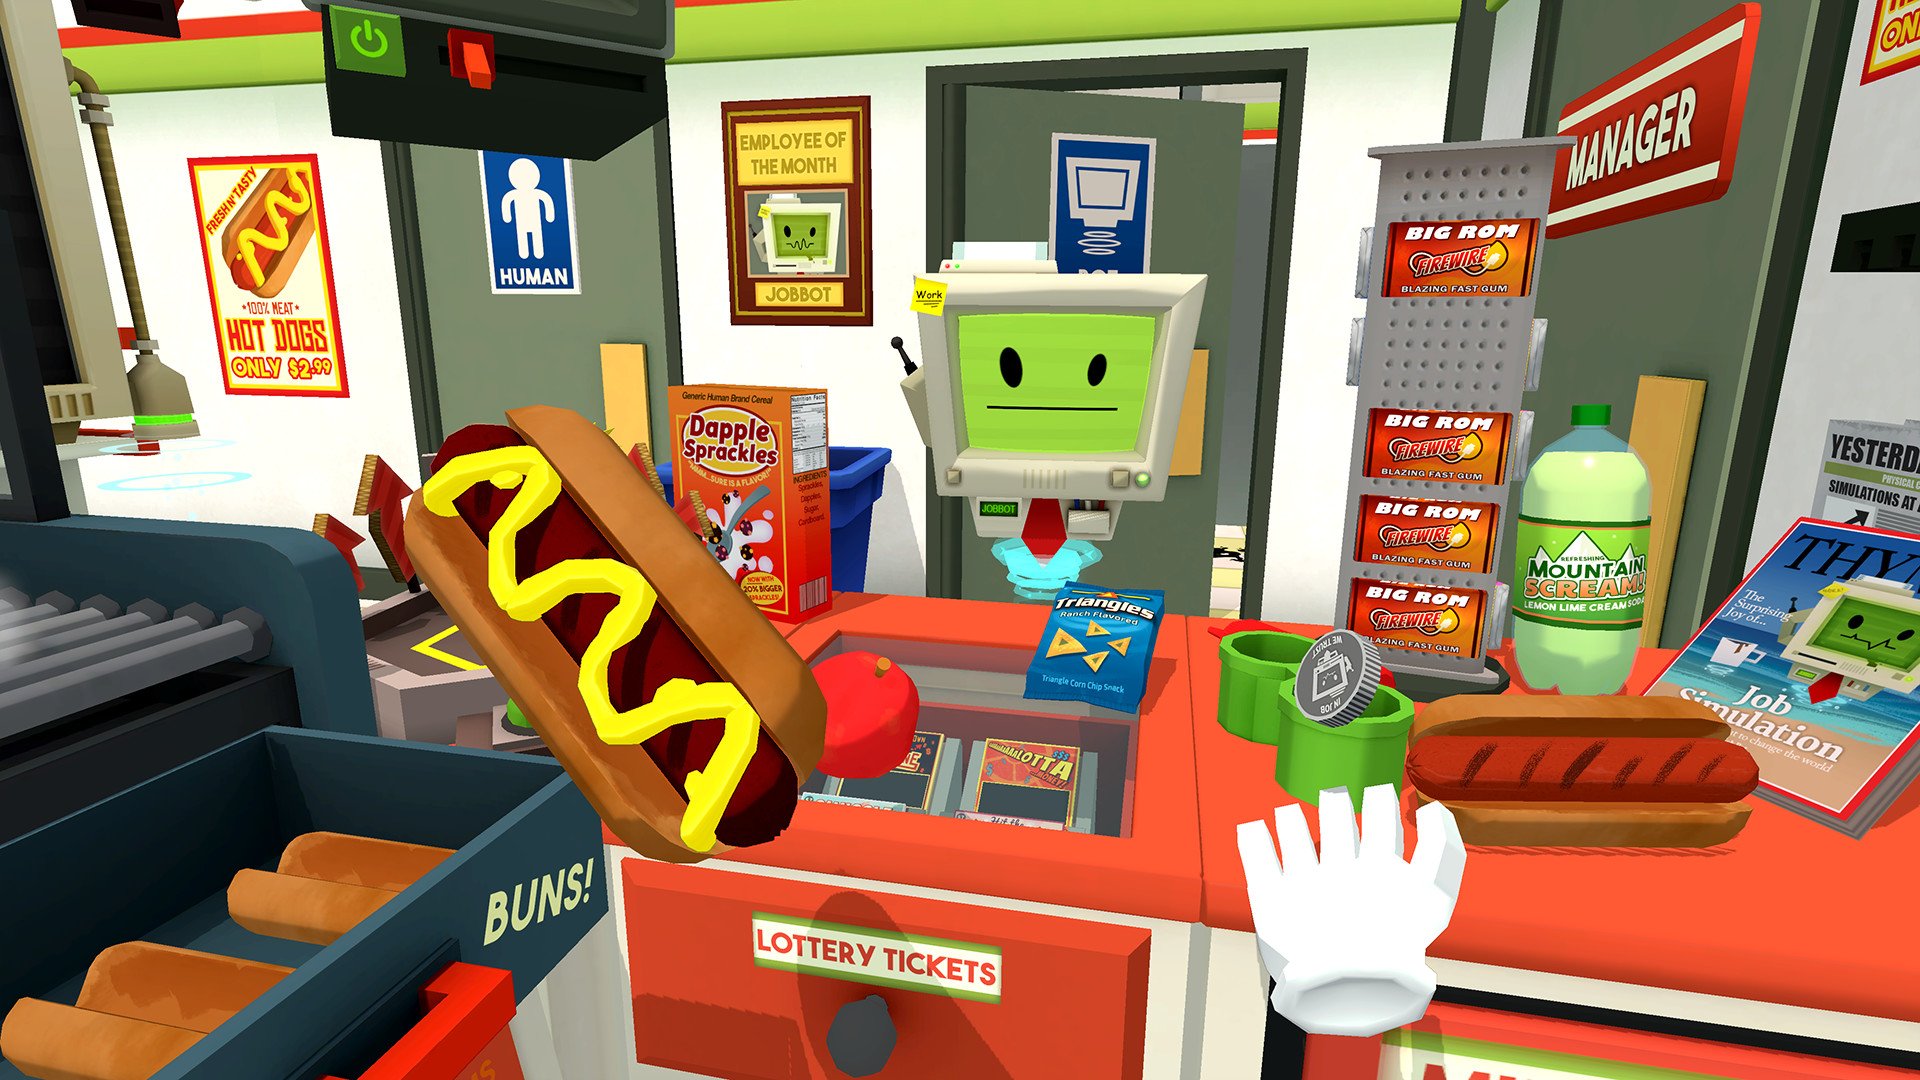 Job Simulator has won numerous accolades, including best VR/AR game at the 2017 GDC Awards